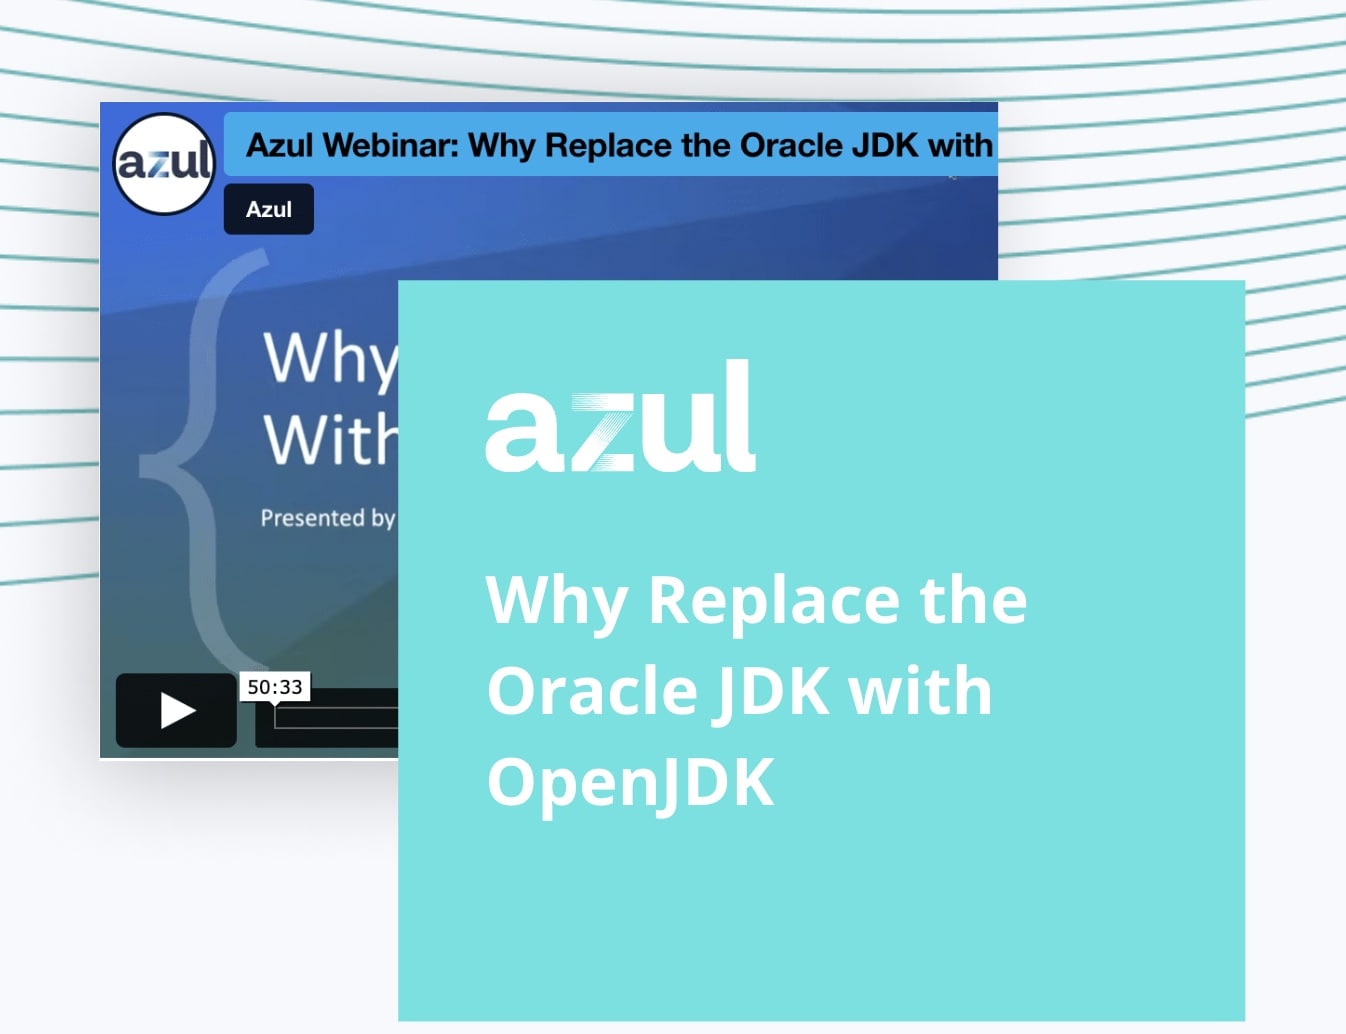 Why Replace the Oracle JDK with OpenJDK